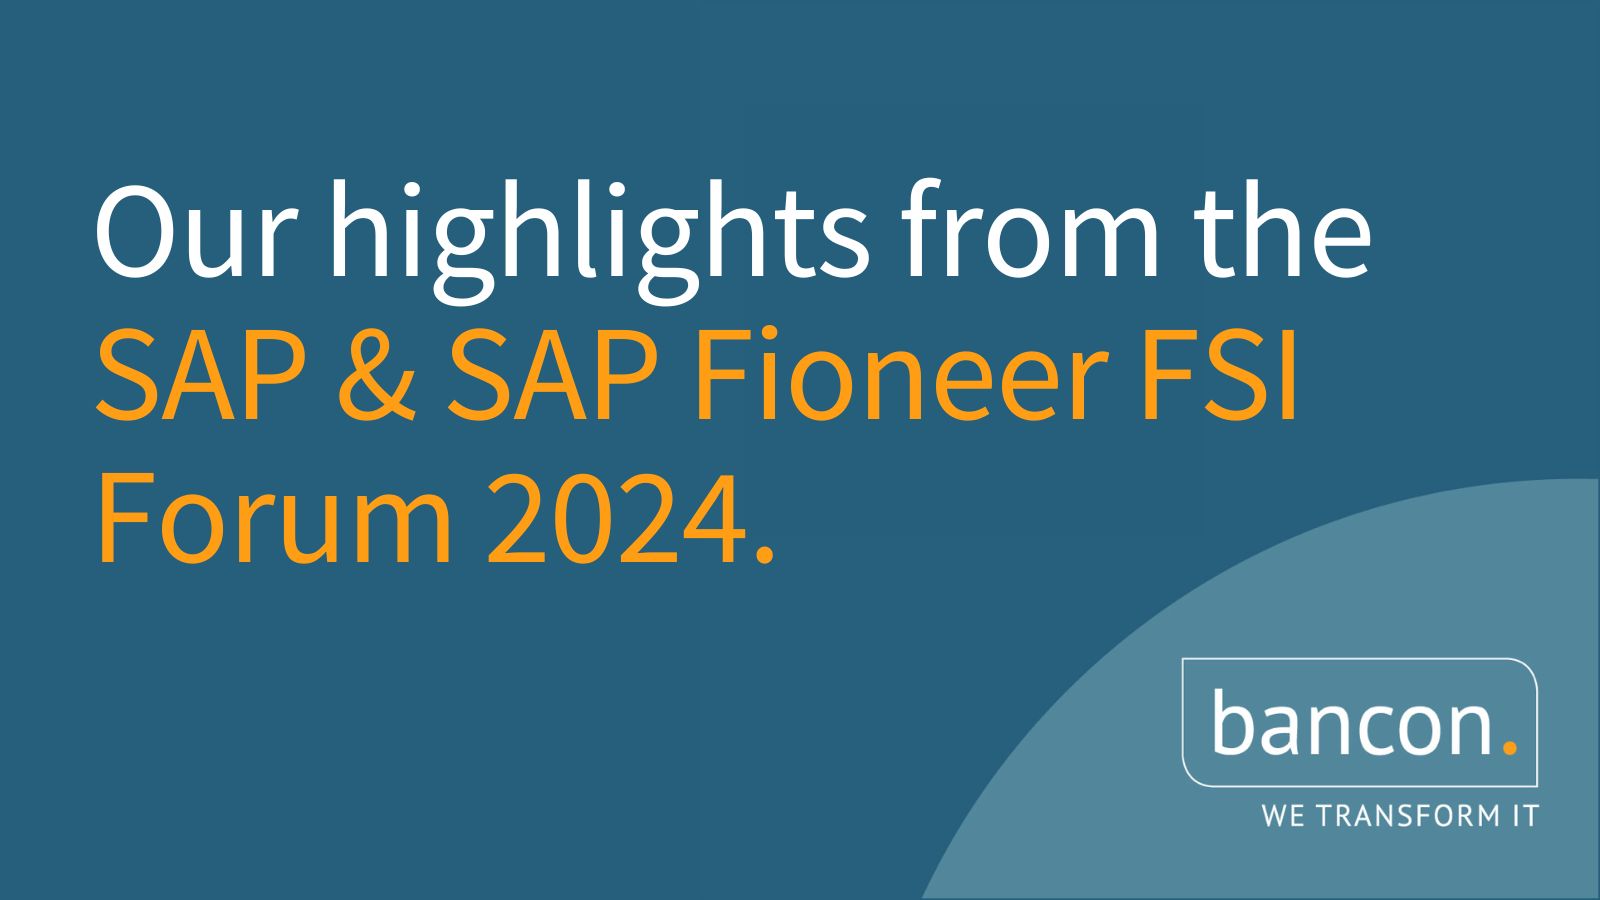 Our highlights from the SAP & SAP Fioneer FSI Forum 2024 